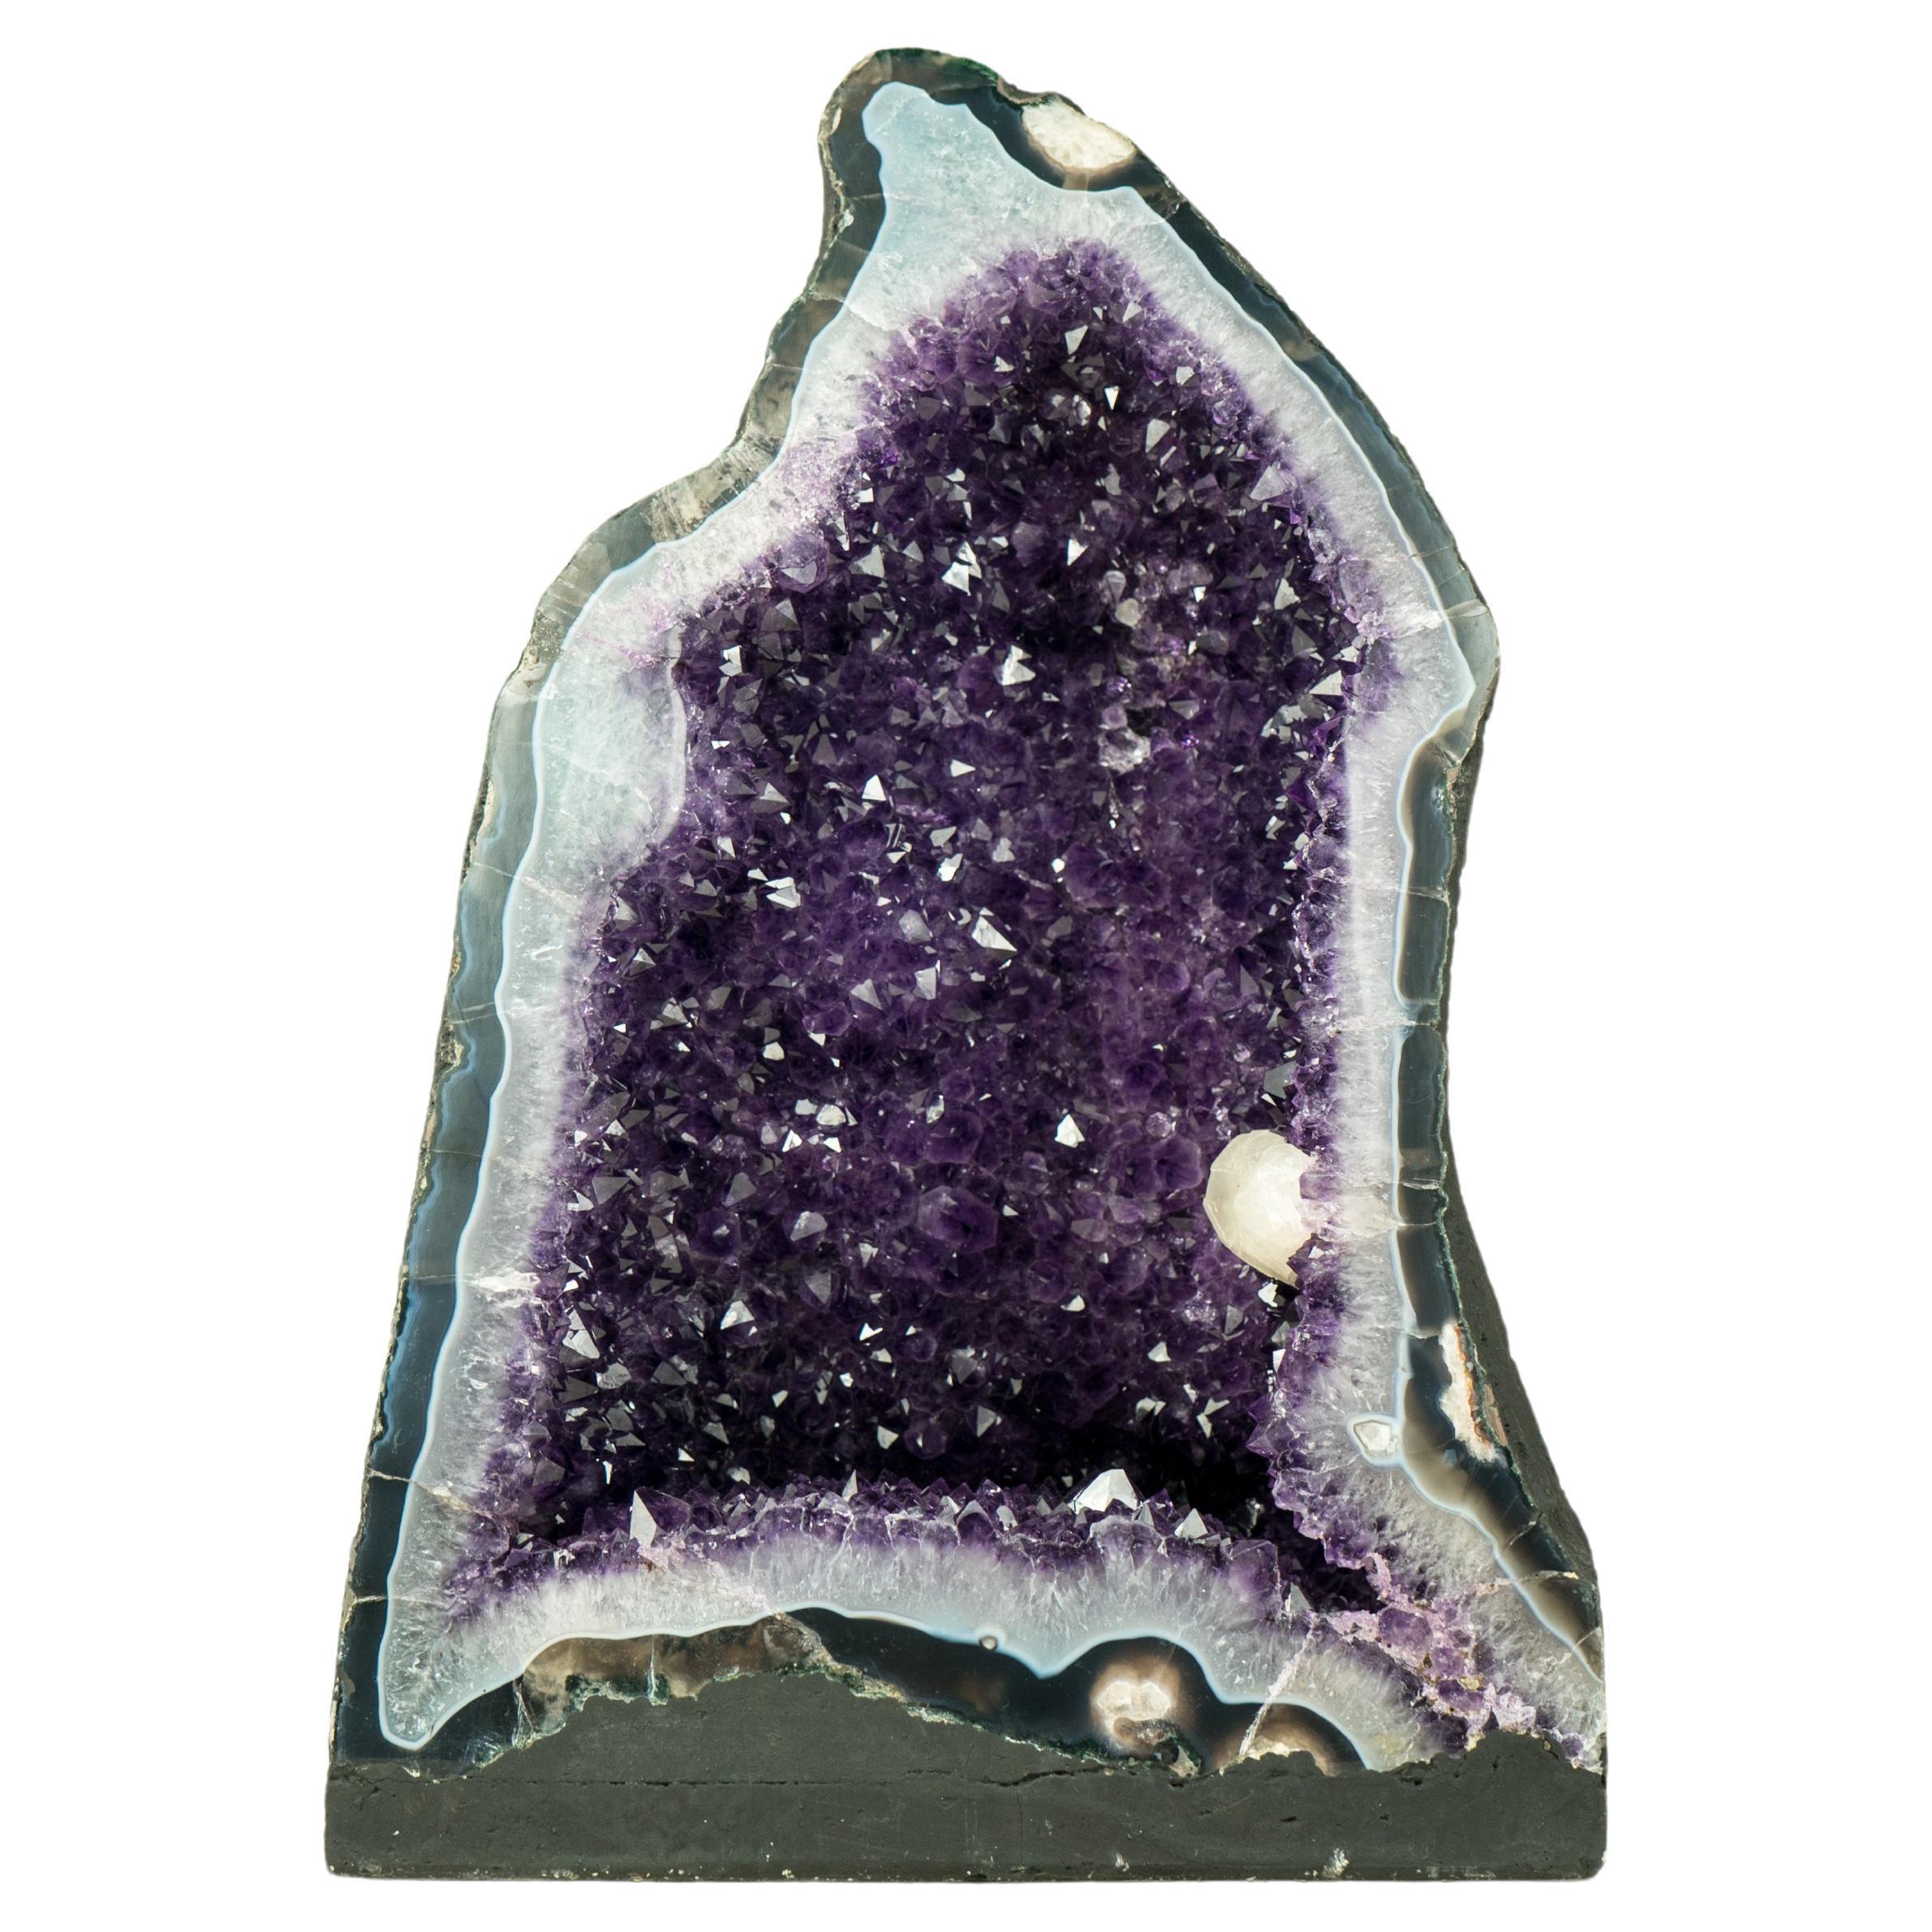 Rare Amethyst Geode with Deep Purple Amethyst, Blue Lace Agate, and Calcitcite